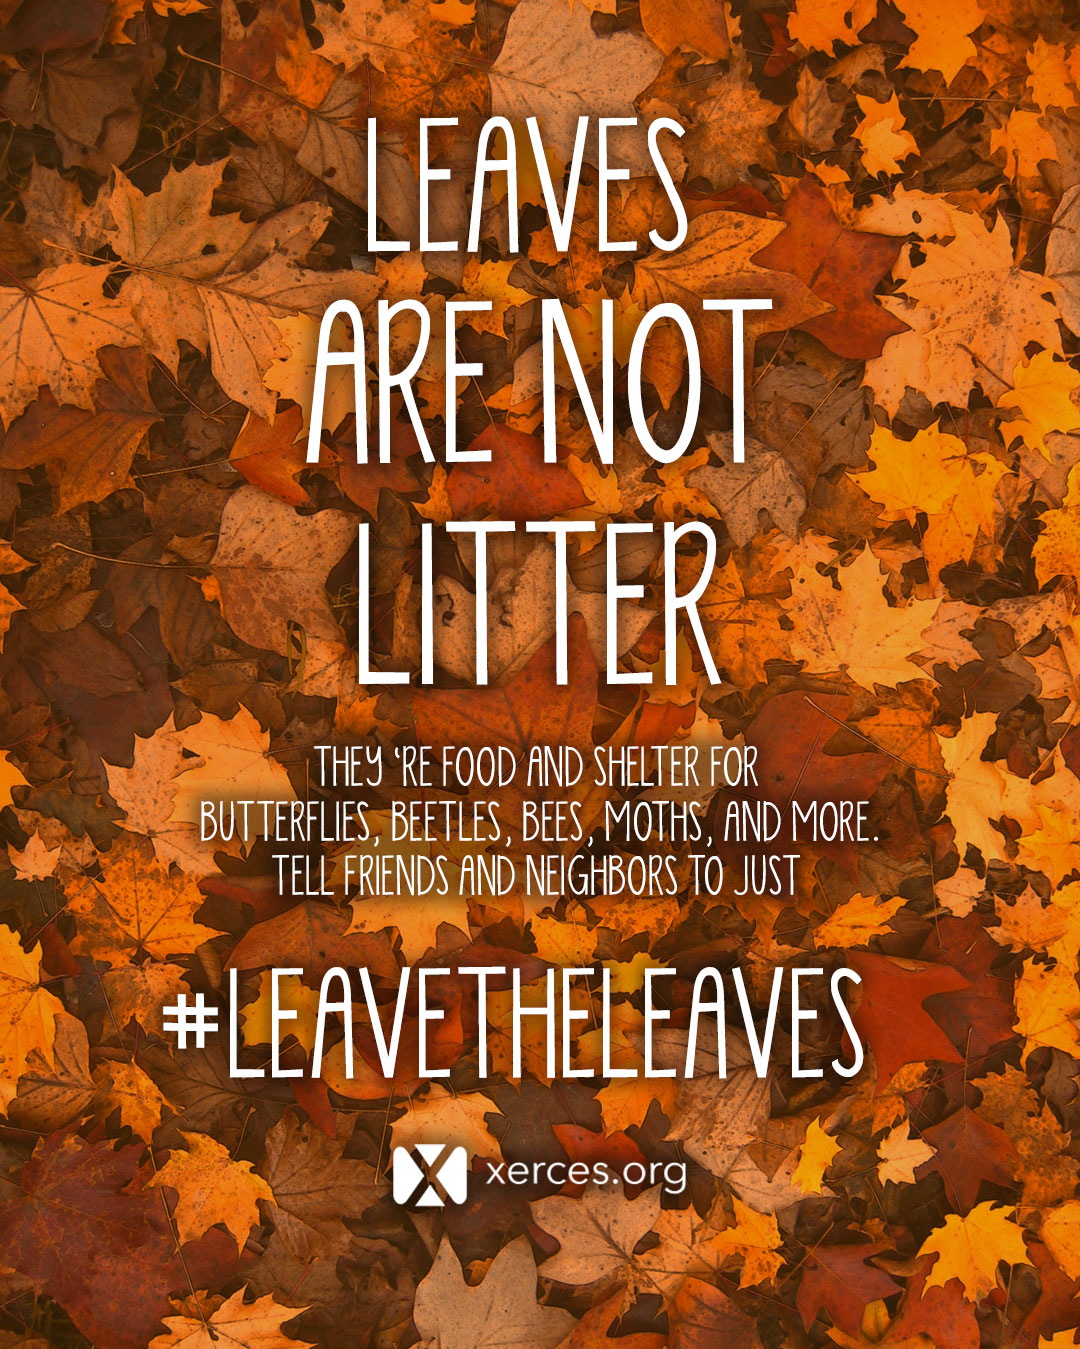 A graphic with a bright background of orange and red leaves has white text that says "Leave Are Not Litter" in large letters. In smaller writing, it says, "They're food and shelter for butterflies, beetles, bees, moths, and more. Tell neighbors and friends to just #leavetheleaves." Then there is a small white Xerces Society logo.